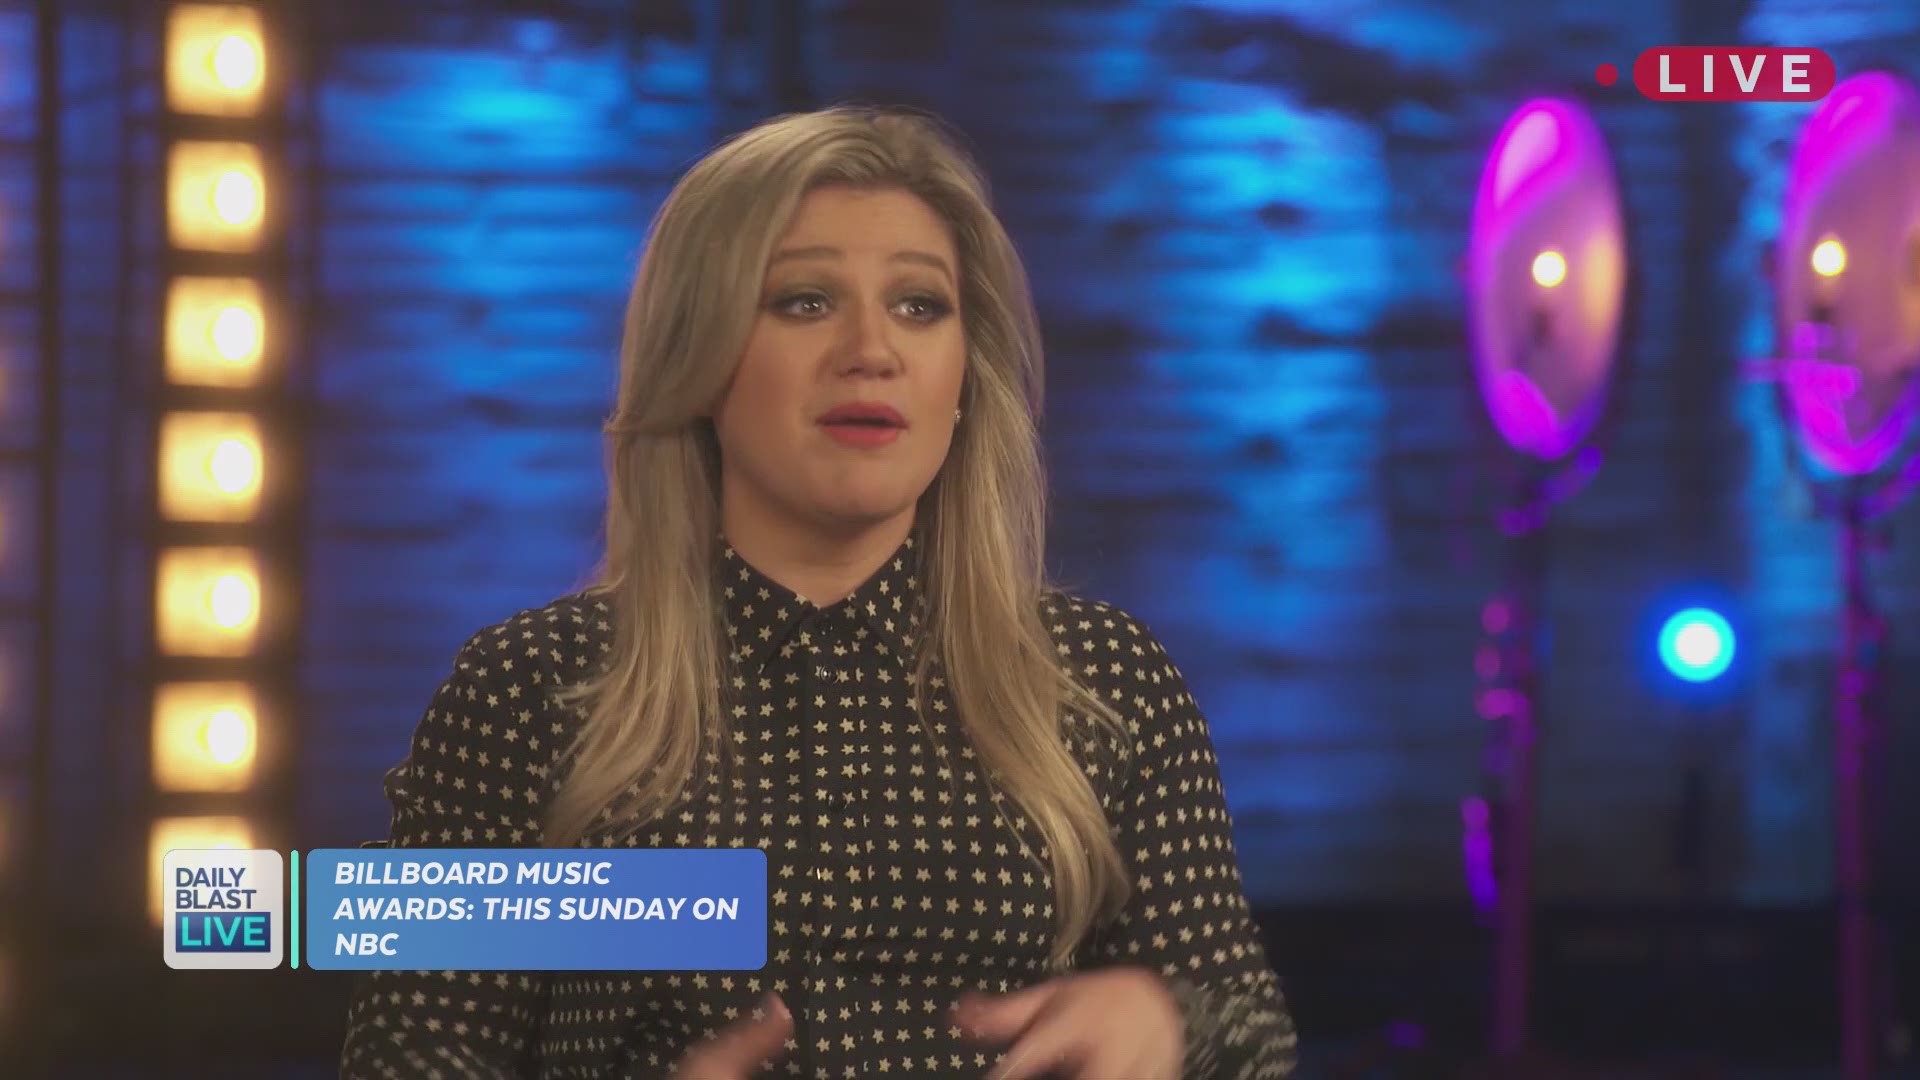 Are you ready to get your groove on? The Billboard Music Awards are this weekend and Daily Blast LIVE is bringing you a behind-the-scenes look at the star-studded event. From a special interview with the nights host, Kelly Clarkson, to the latest news on